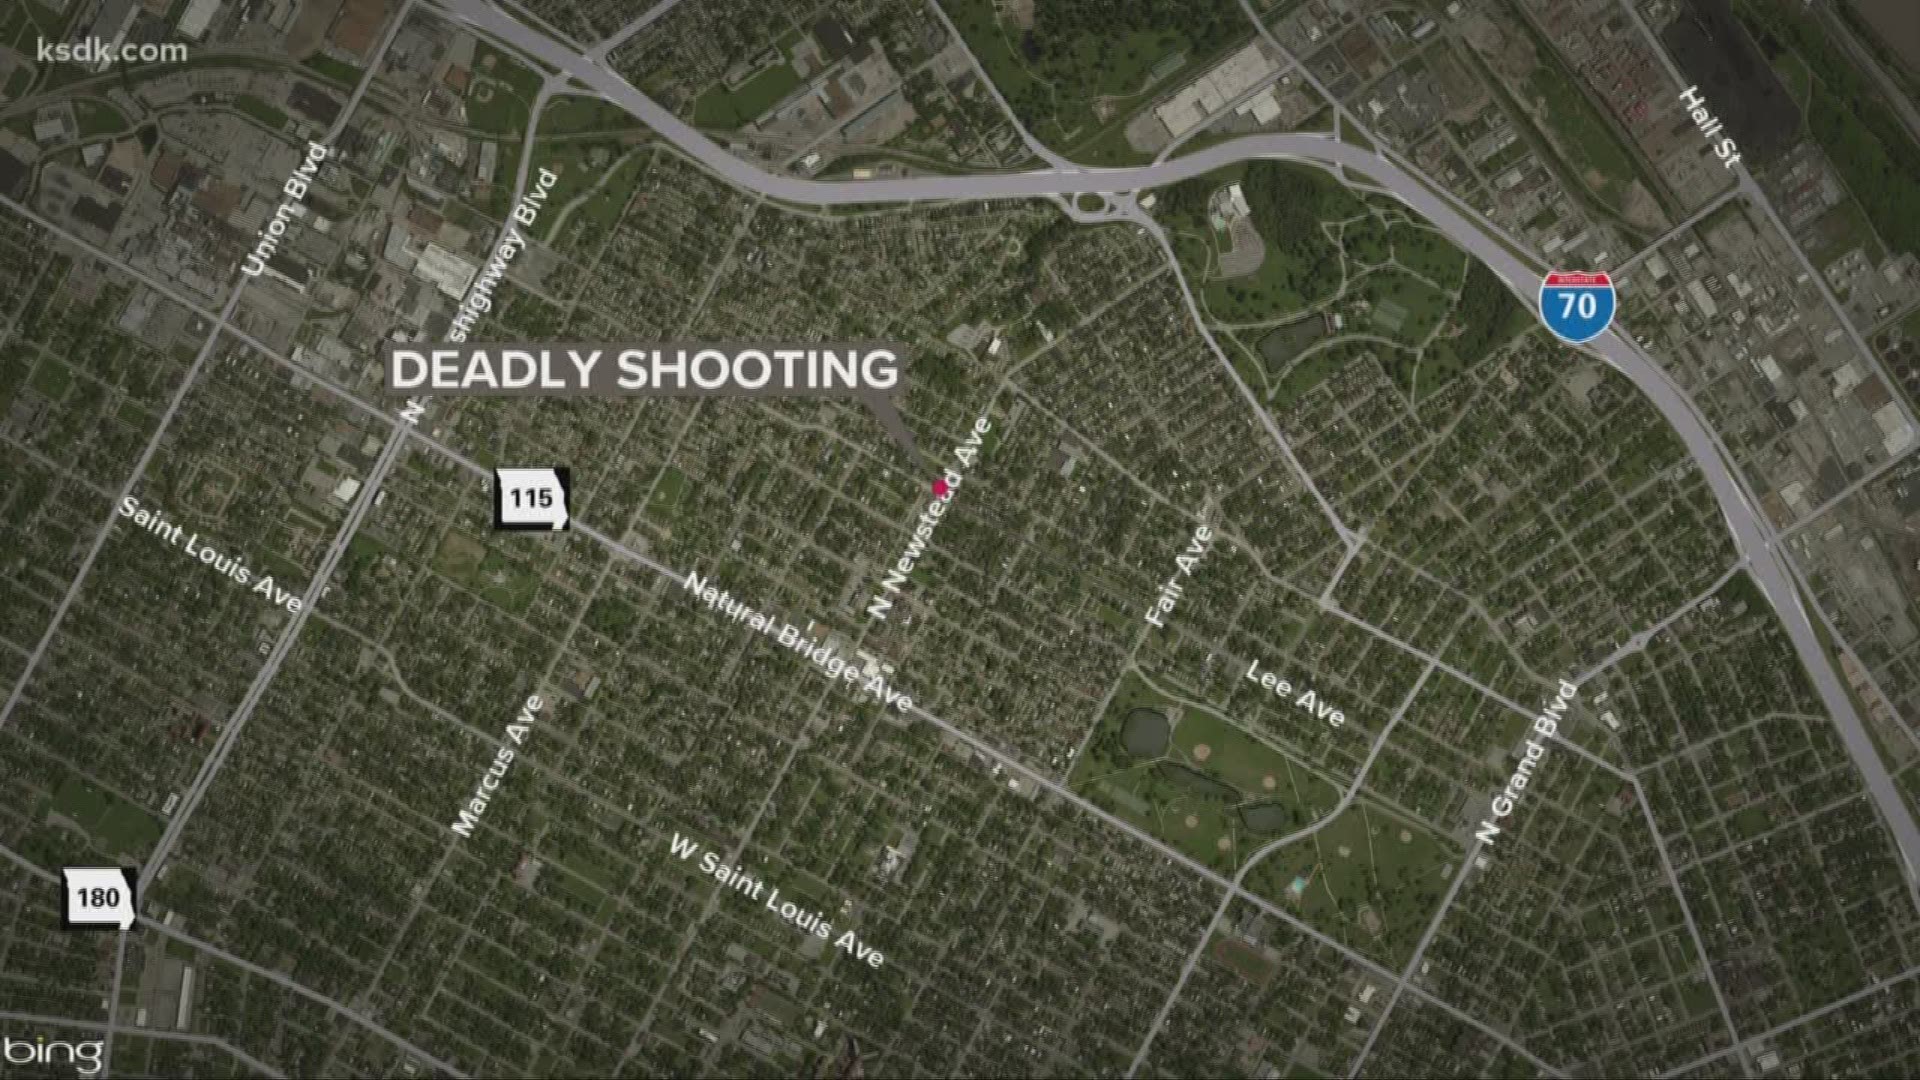 Shootings across St. Louis area early Saturday morning